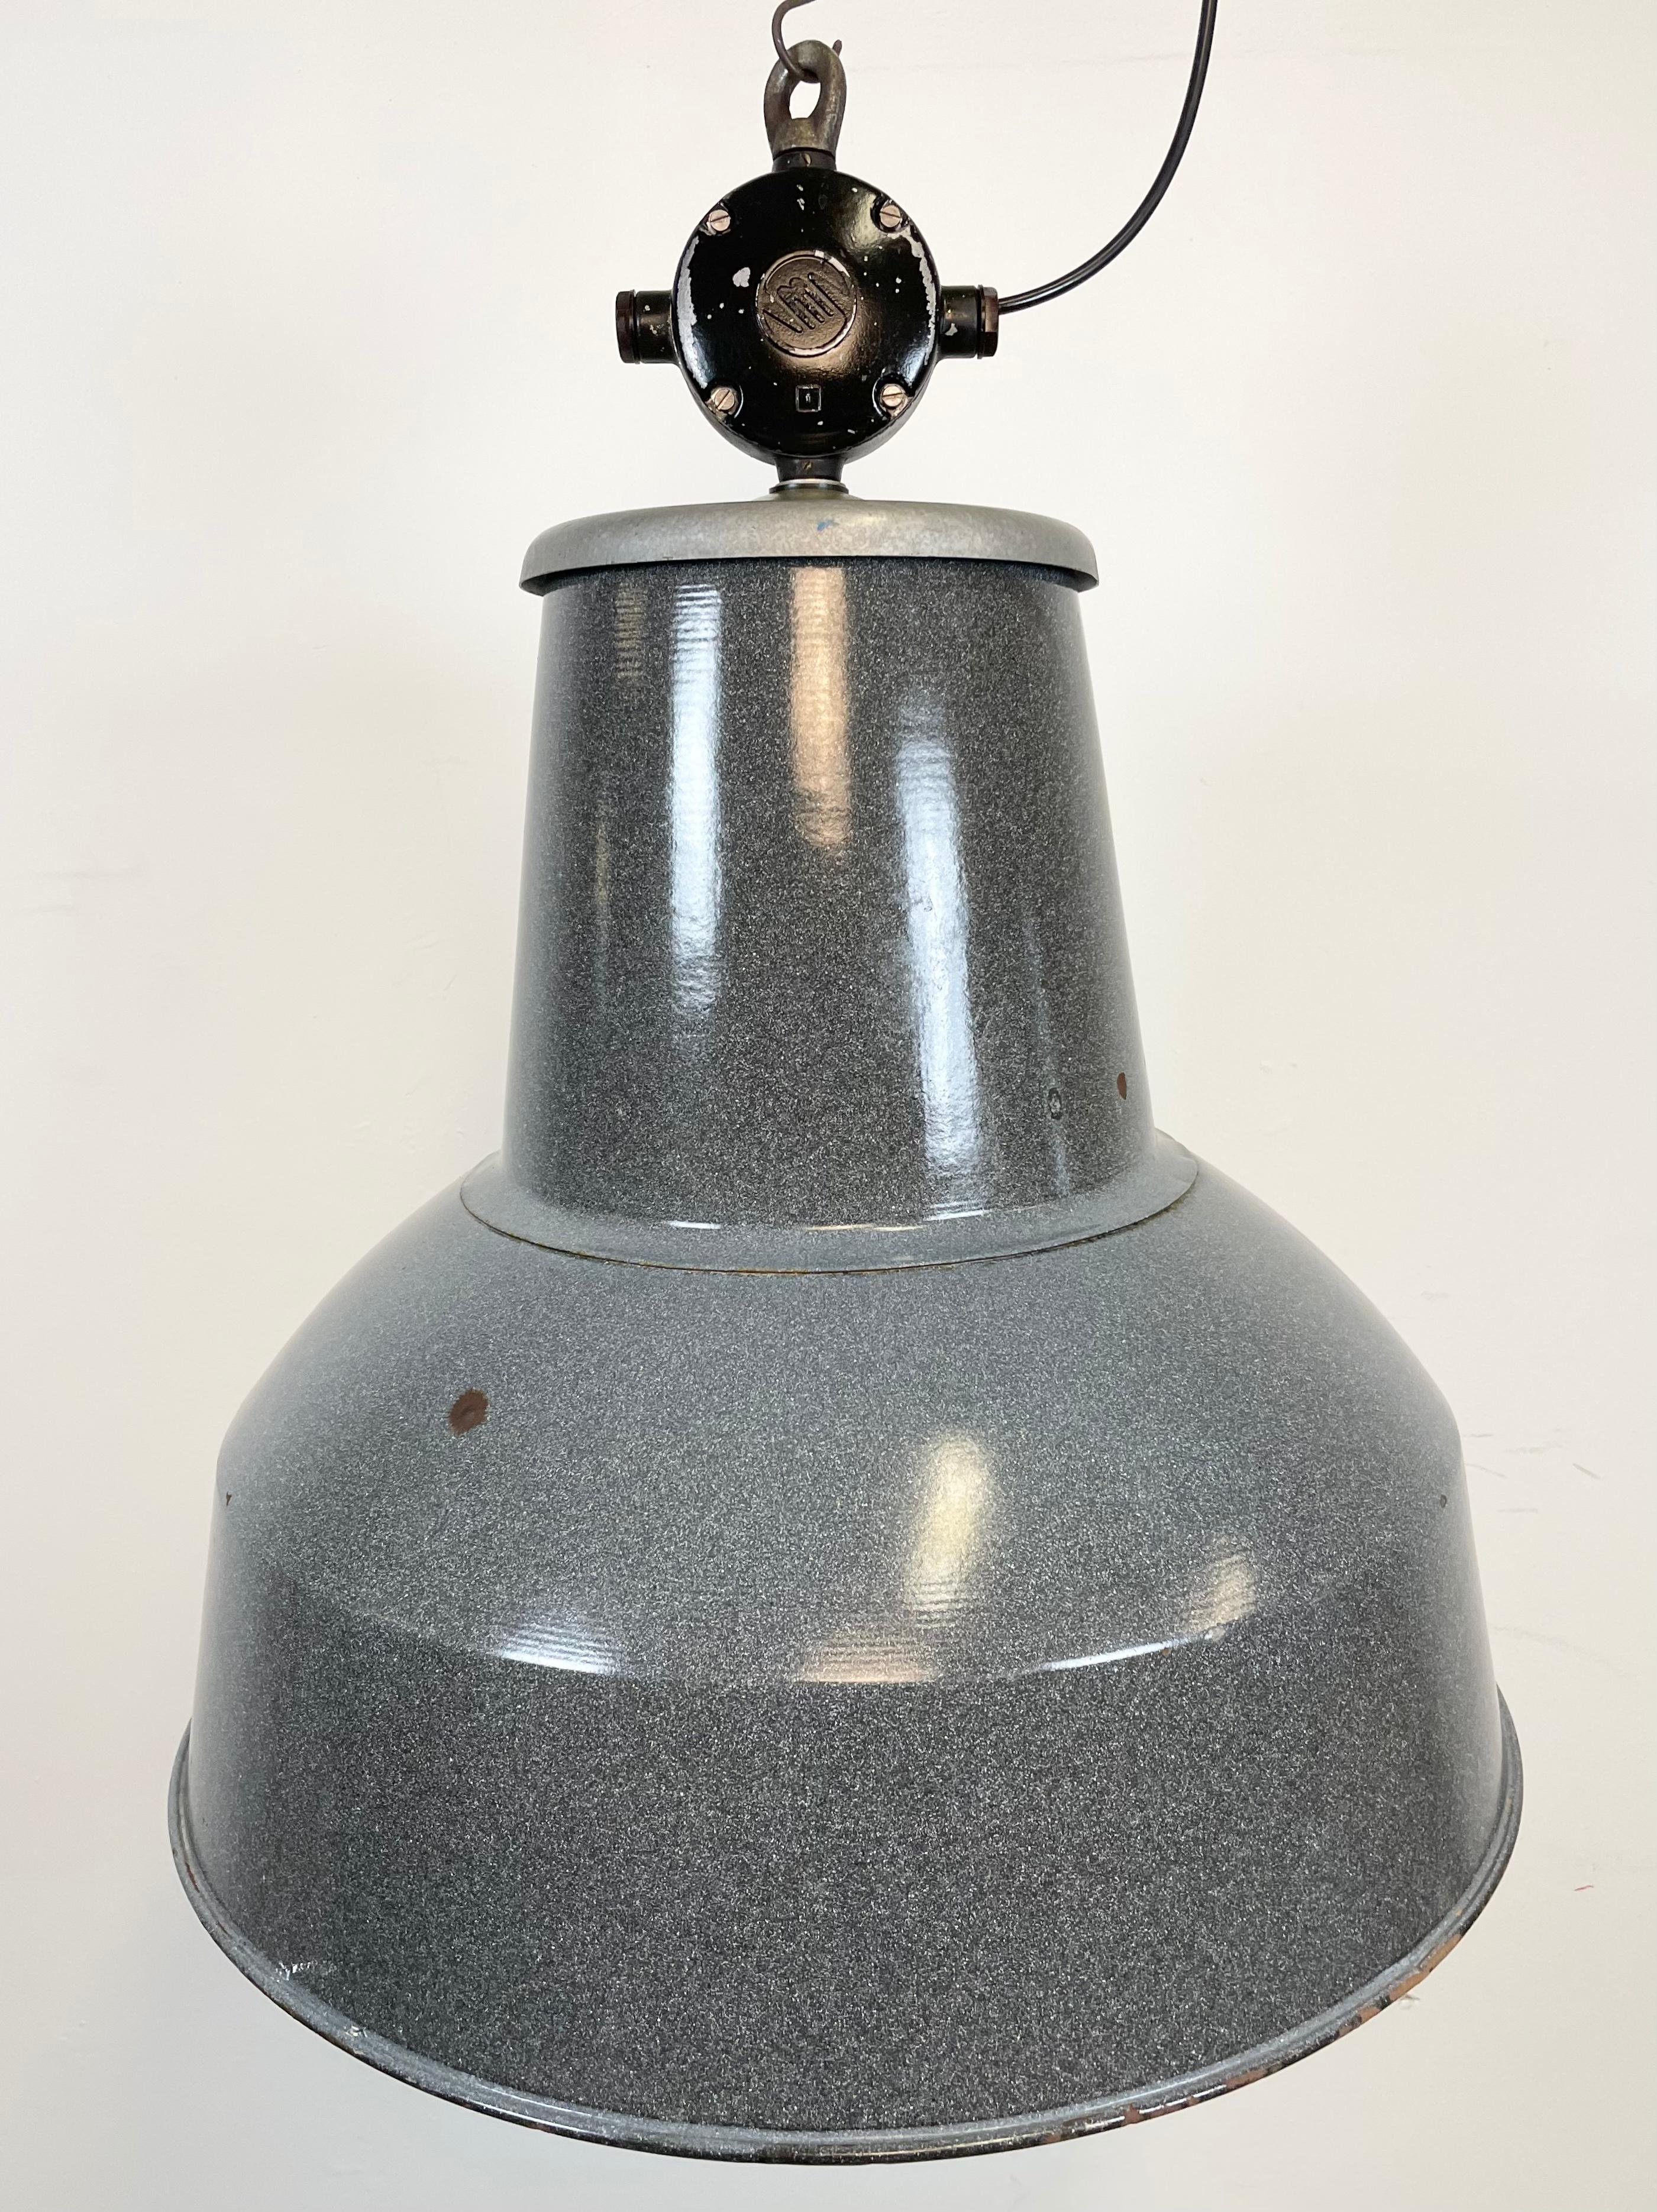 This grey industrial pendant light was designed in the 1960s and produced by Elektrosvit in the former Czechoslovakia. It features a cast aluminium top, a grey enamel exterior and a white enamel interior.
New porcelain socket for E 27 lightbulbs